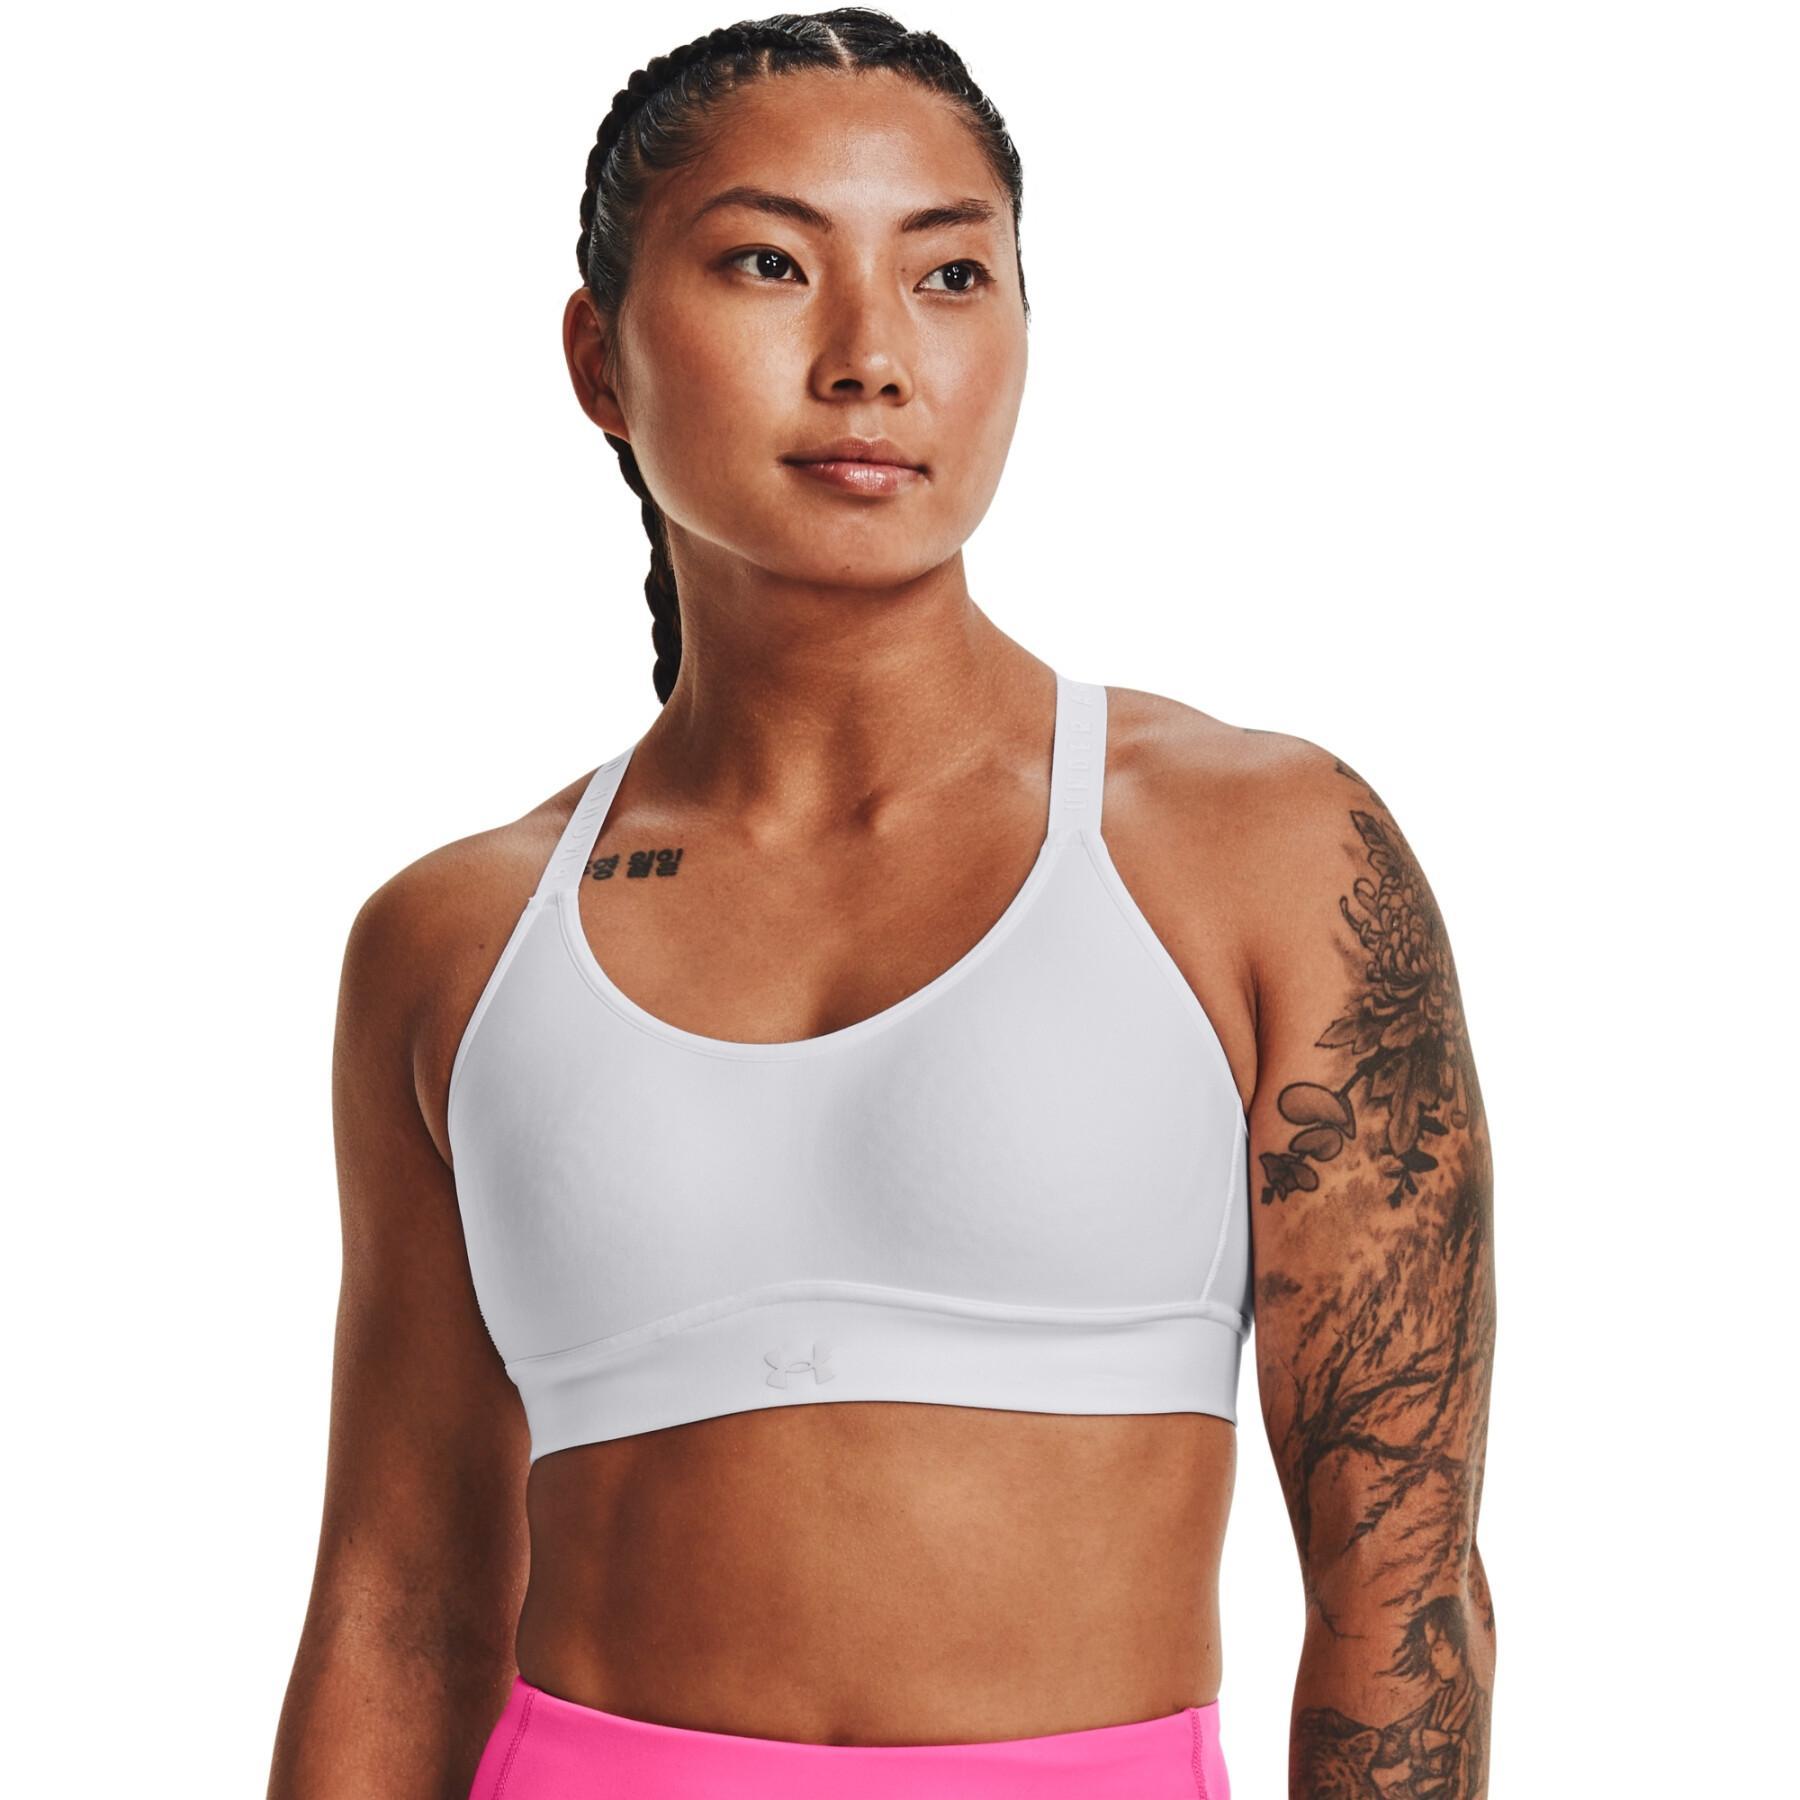 Moderate women's bra Under Armour Infinity covered impact - Bras